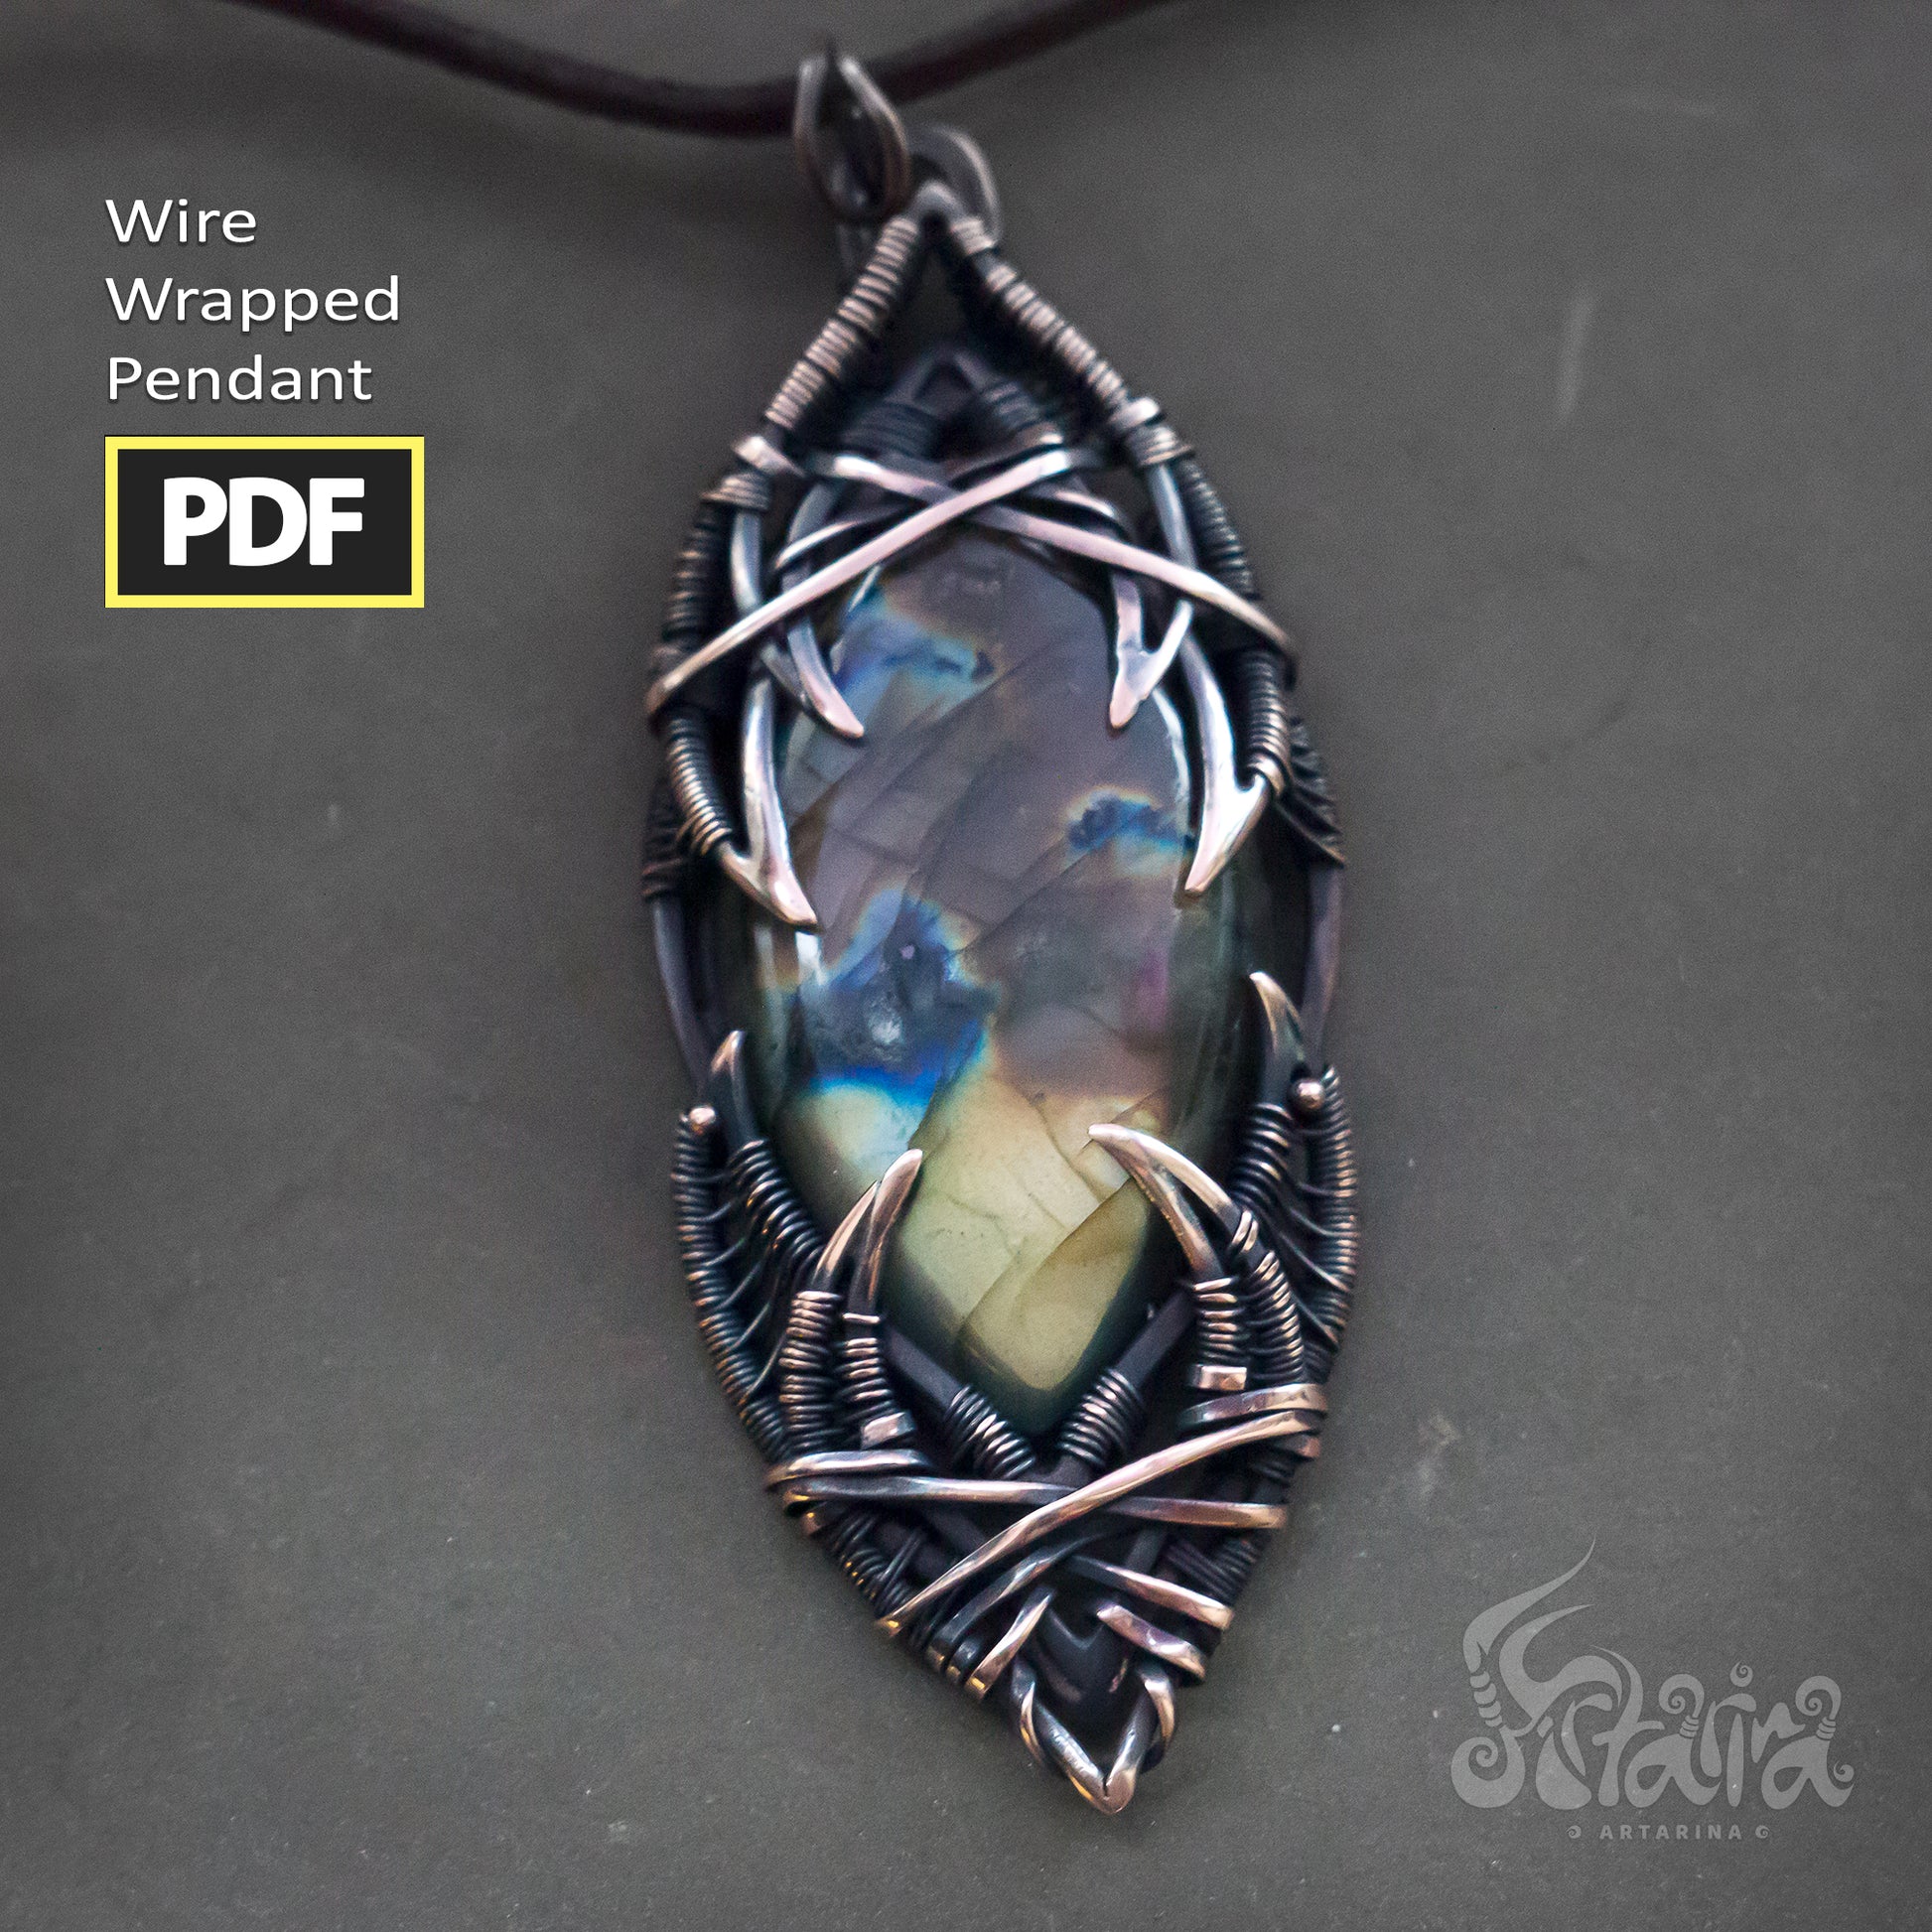 Complex Heady Wire Wrapping Tutorials BUNDLE pic 3